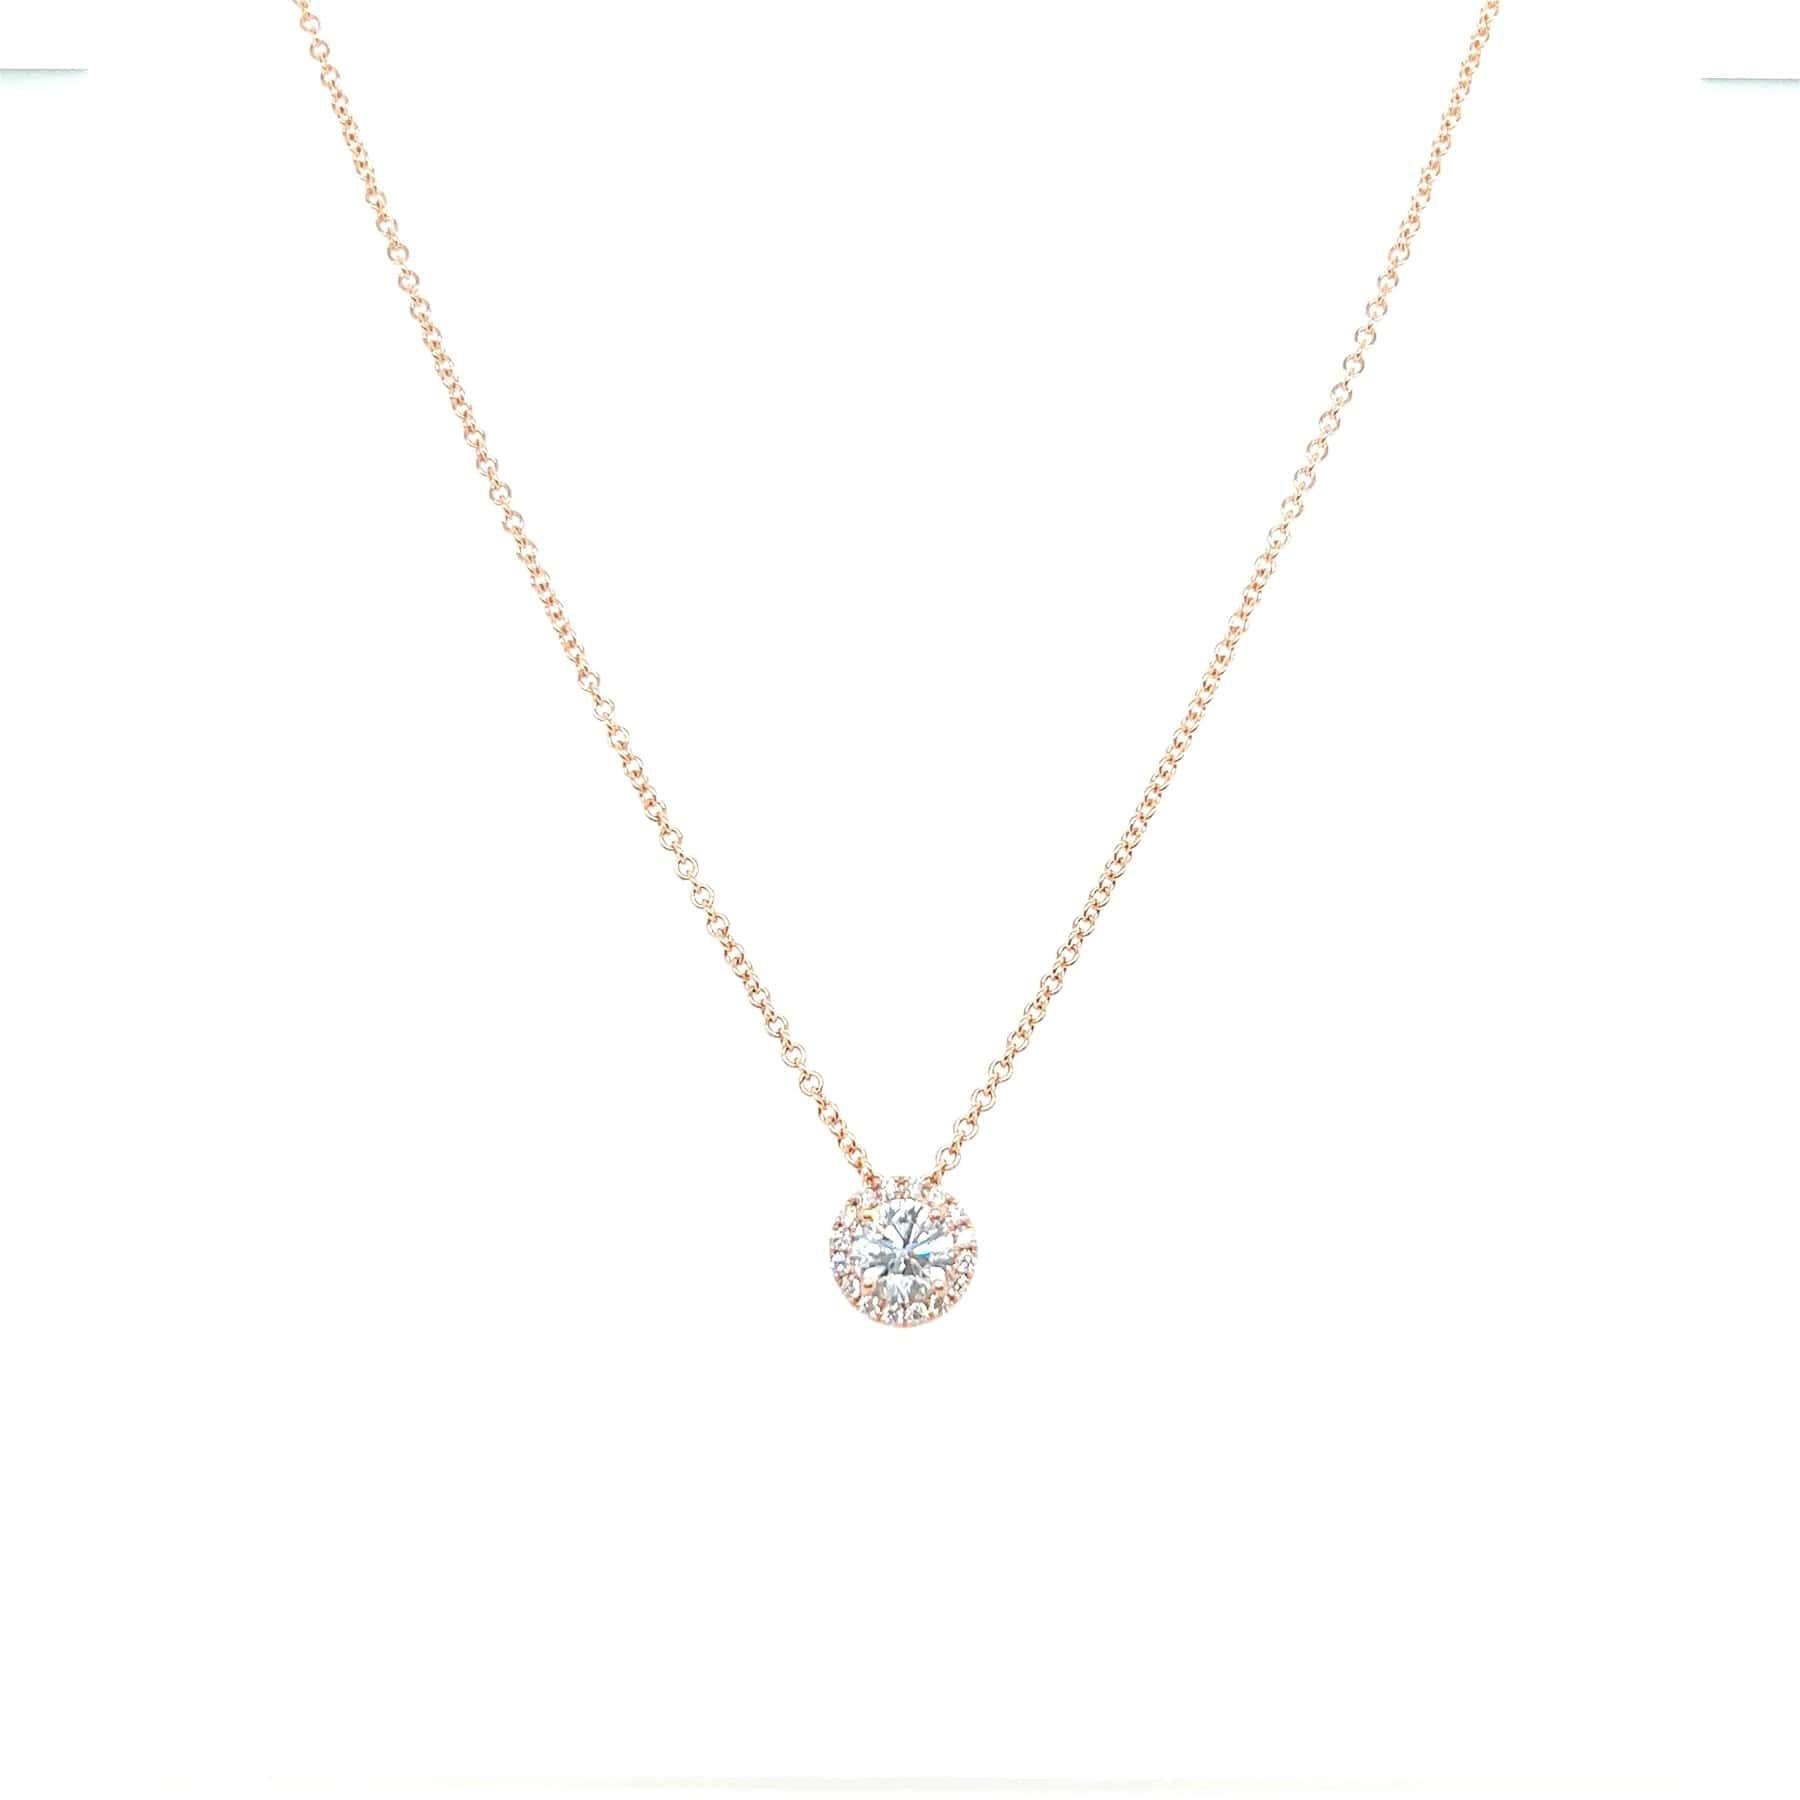 This diamond circle pendant provides a glowing chic look

Necklace Information
Metal : 14k Gold
Diamond Total Carats : 0.40ttcw
Diamond Cut : Round Natural Diamonds
Diamond Clarity : VS -SI
Diamond Color : F-G
Color : White Gold, Yellow Gold, Rose